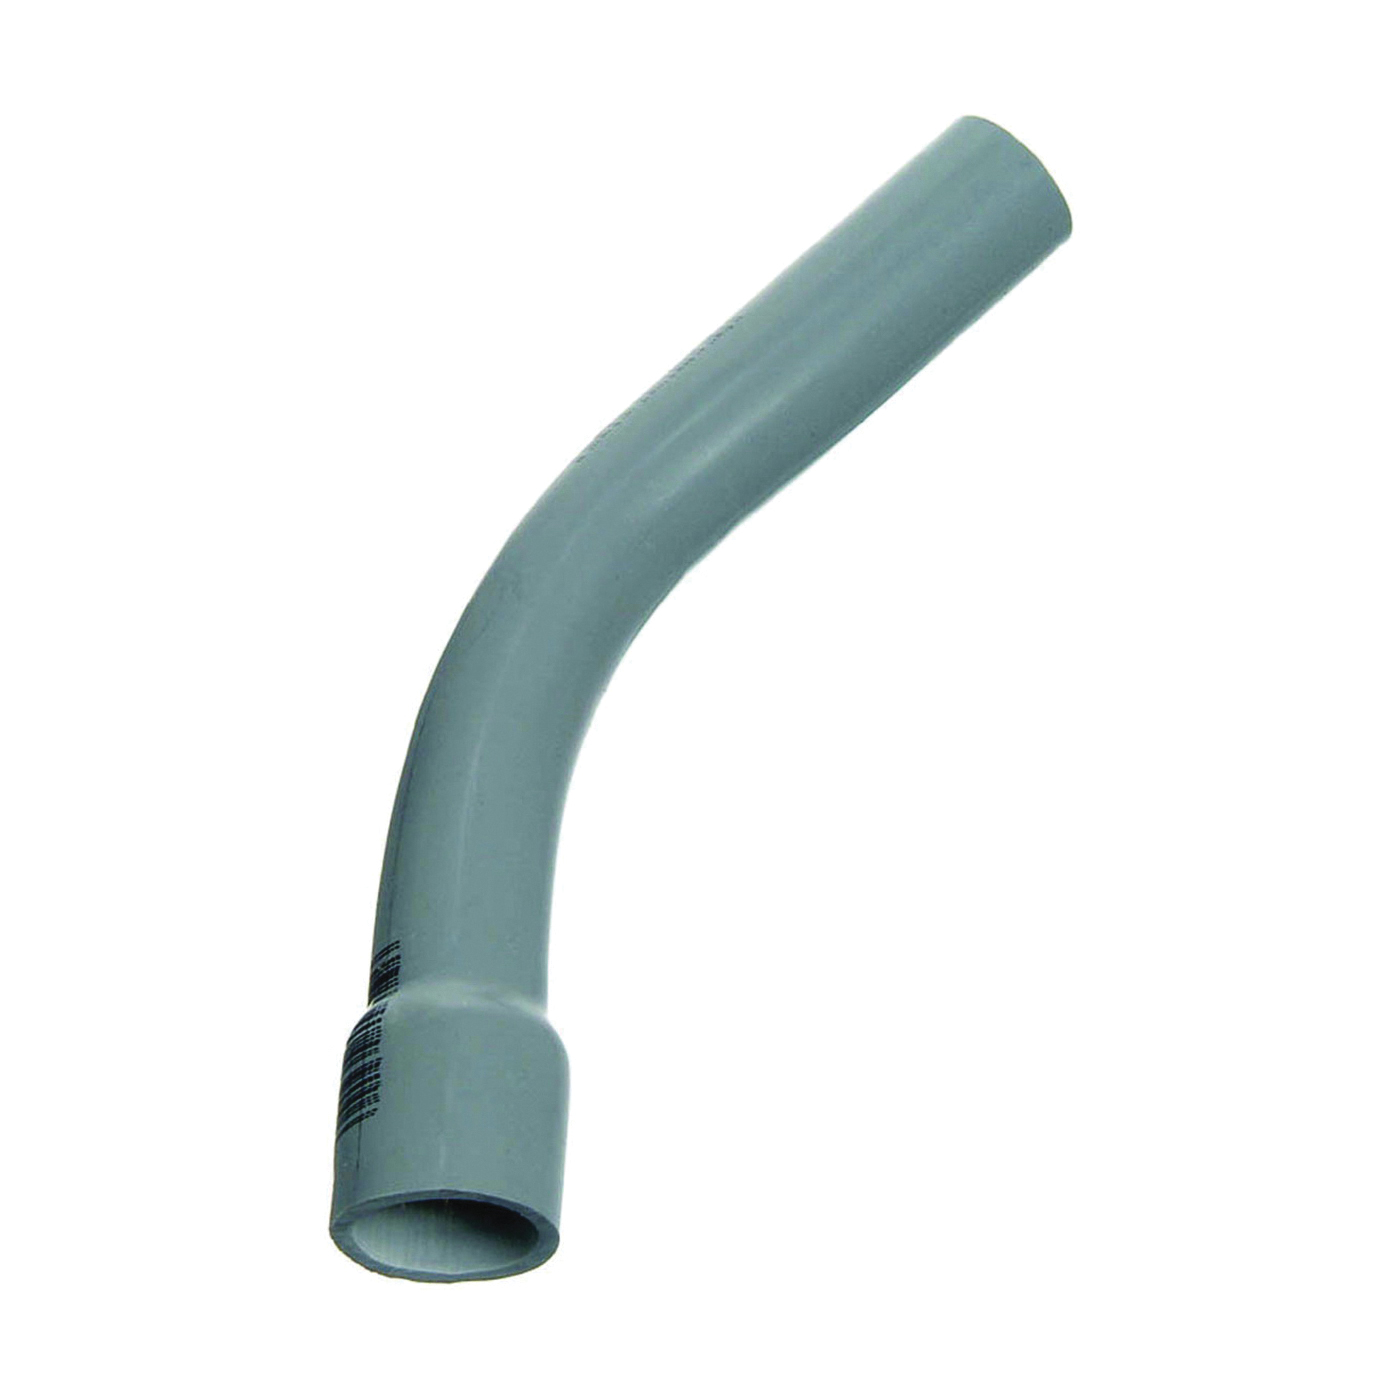 UA7AKB-CAR Elbow, 2-1/2 in Trade Size, 45 deg Angle, SCH 40 Schedule Rating, PVC, Bell End, Gray